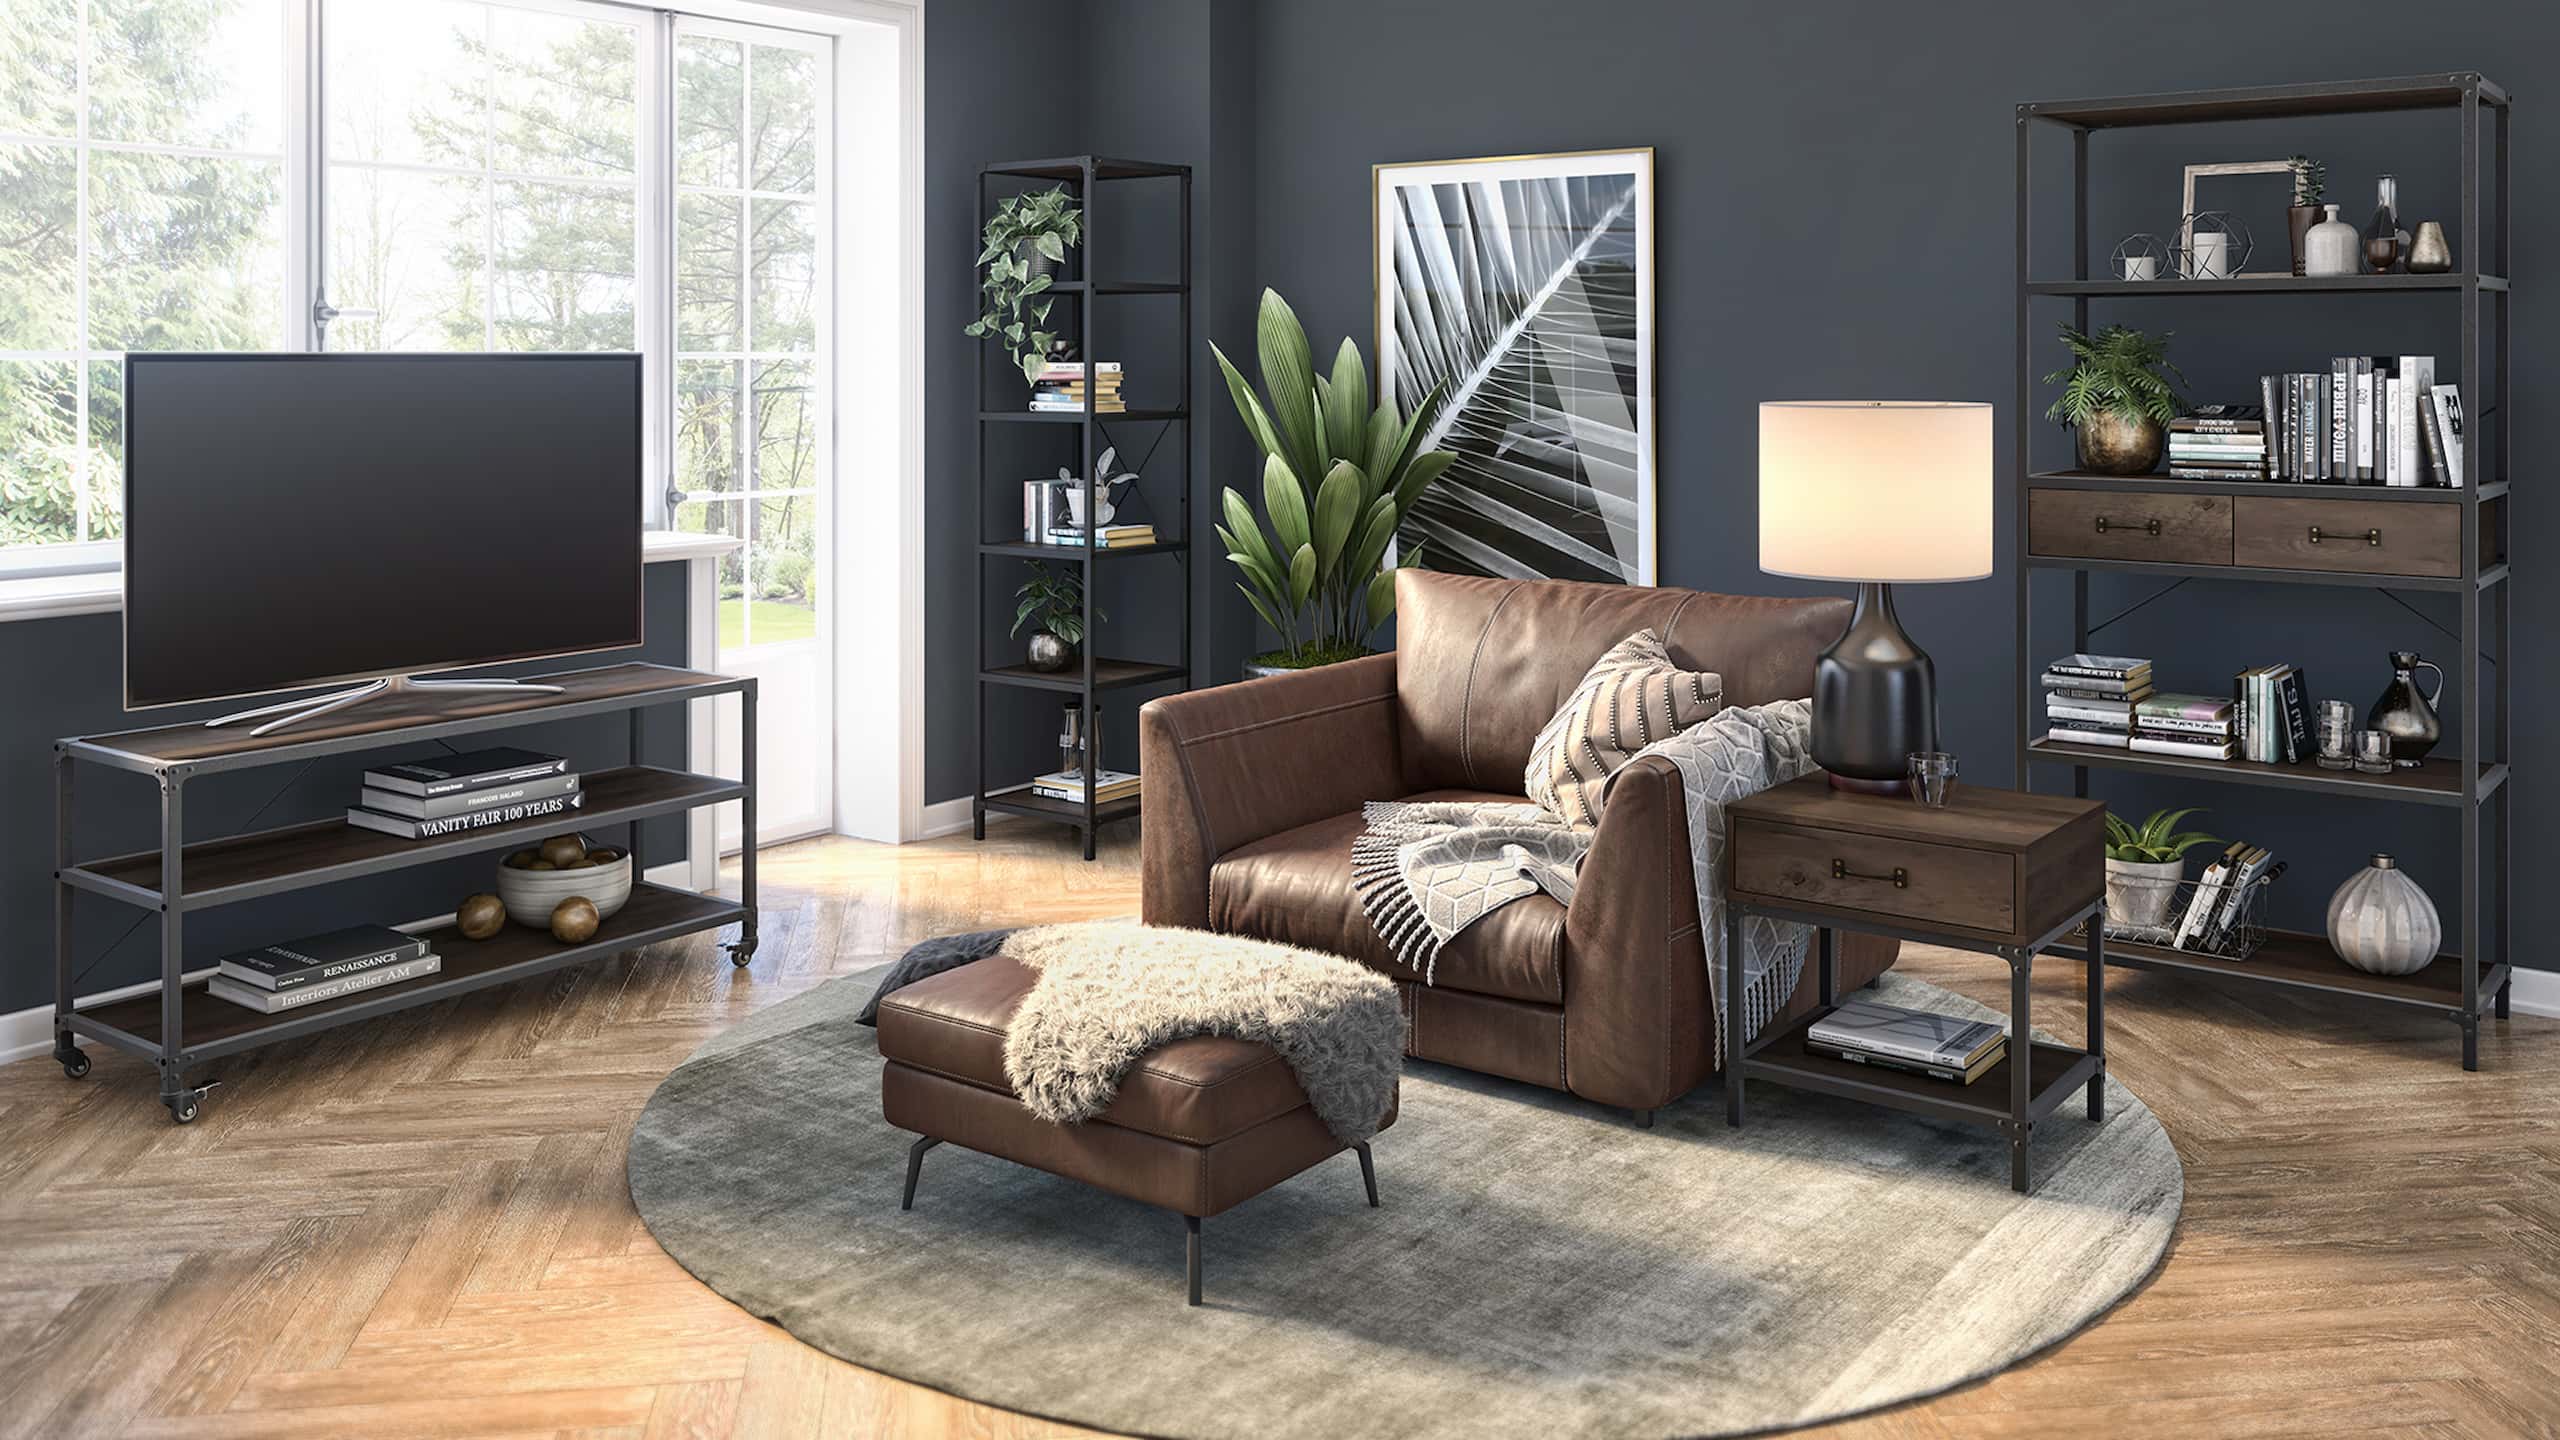 Upscale living room with Bestar furniture